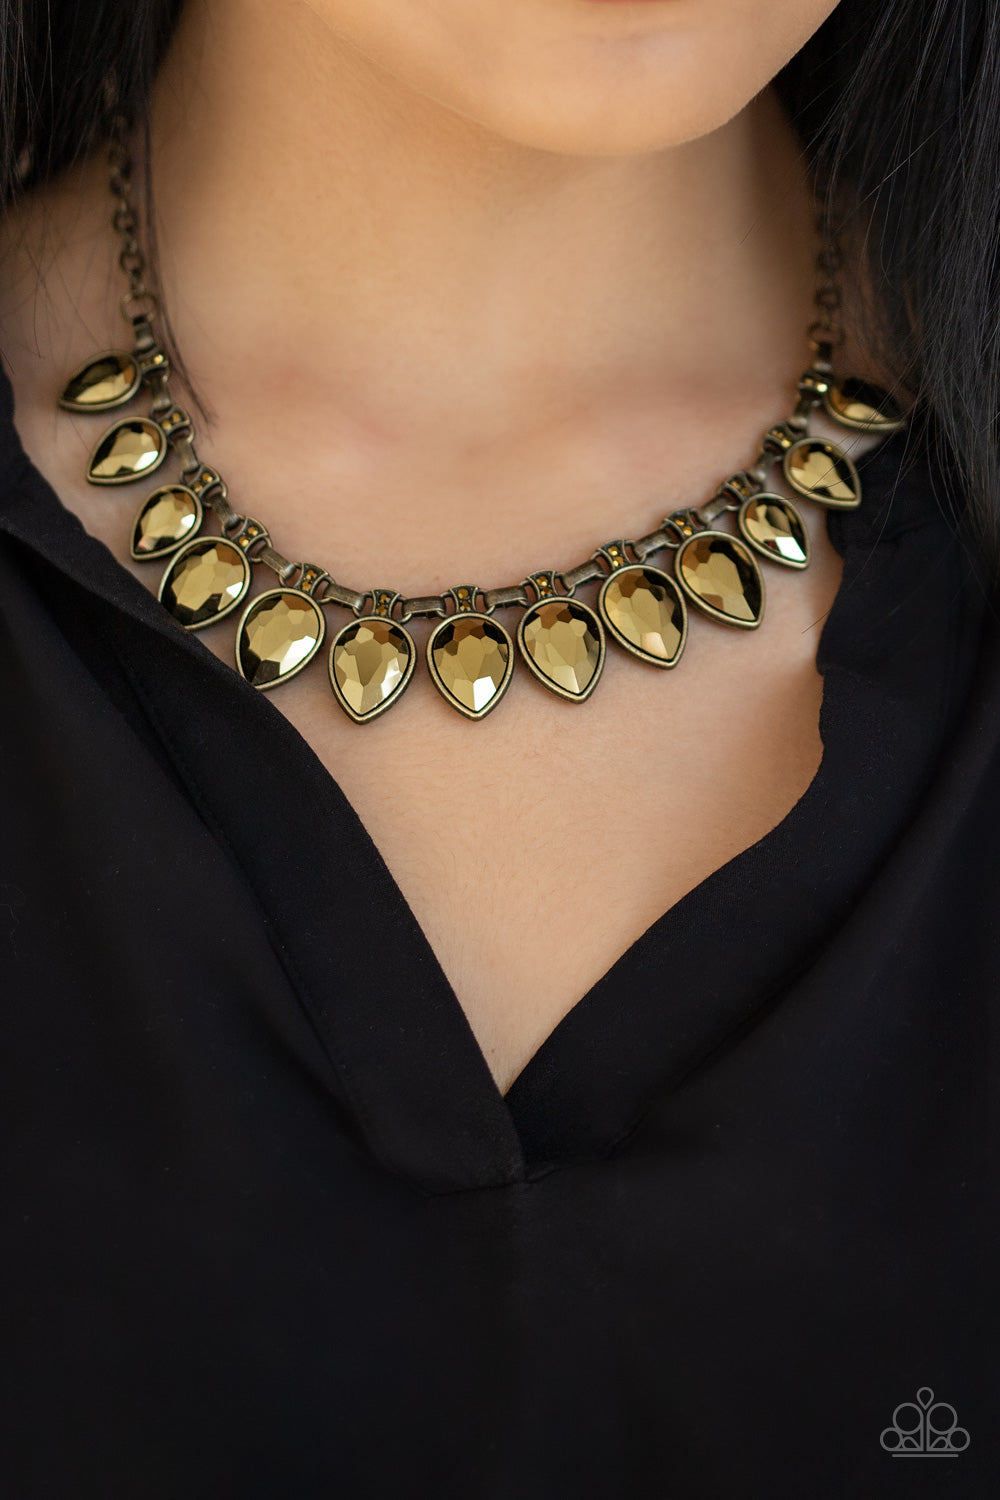 FEARLESS is More Necklace - Brass